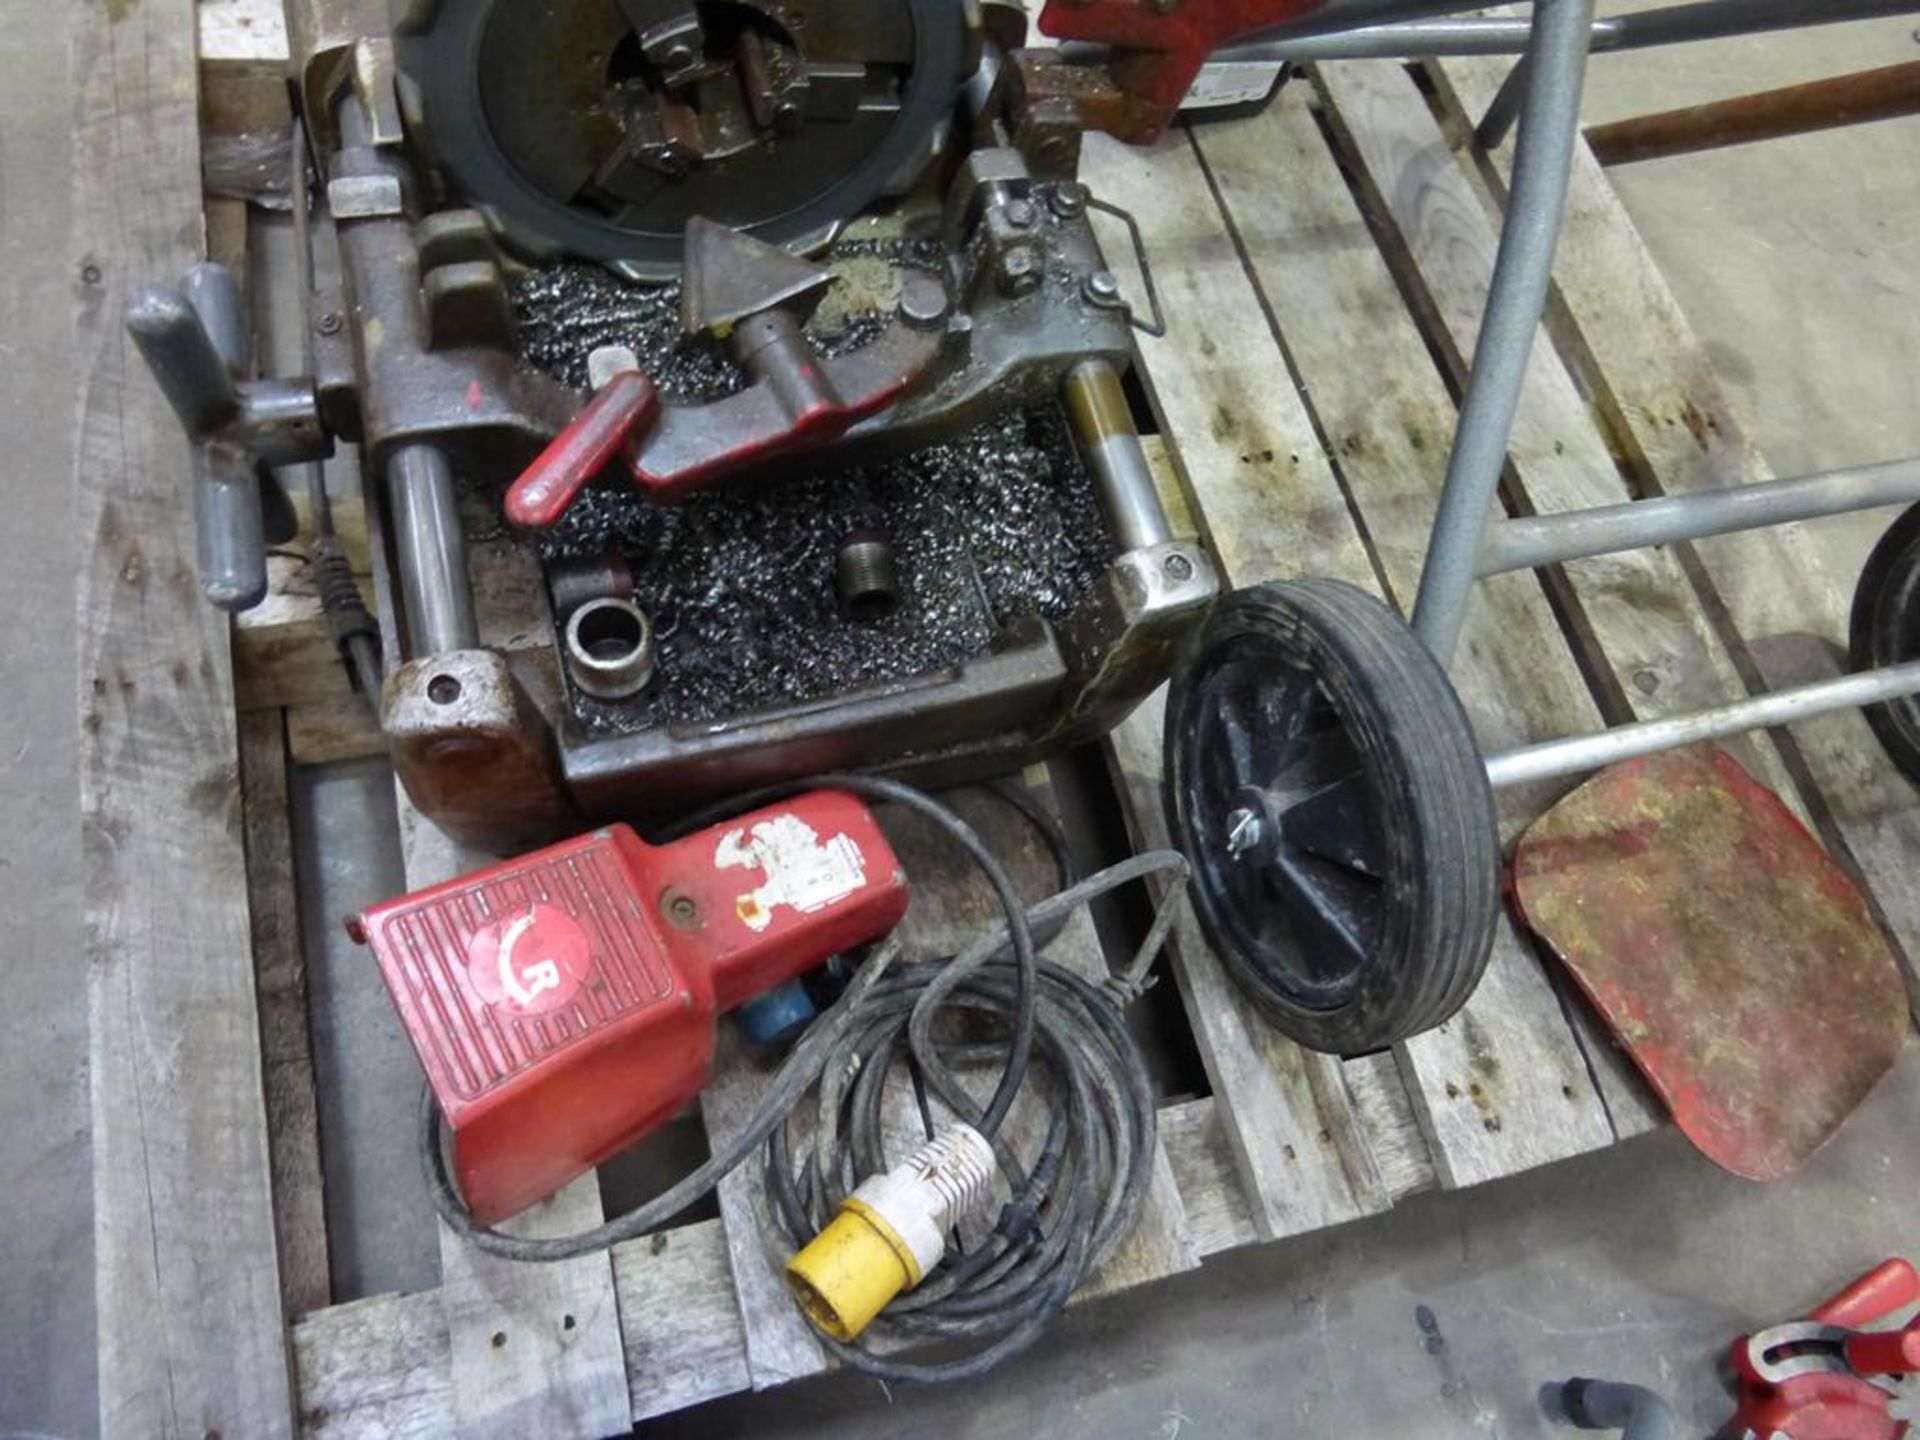 * Rothenberger Supertronic 3 SE Pipe Threading Machine c/w Stand etc. Please note there is a £10 - Image 6 of 7